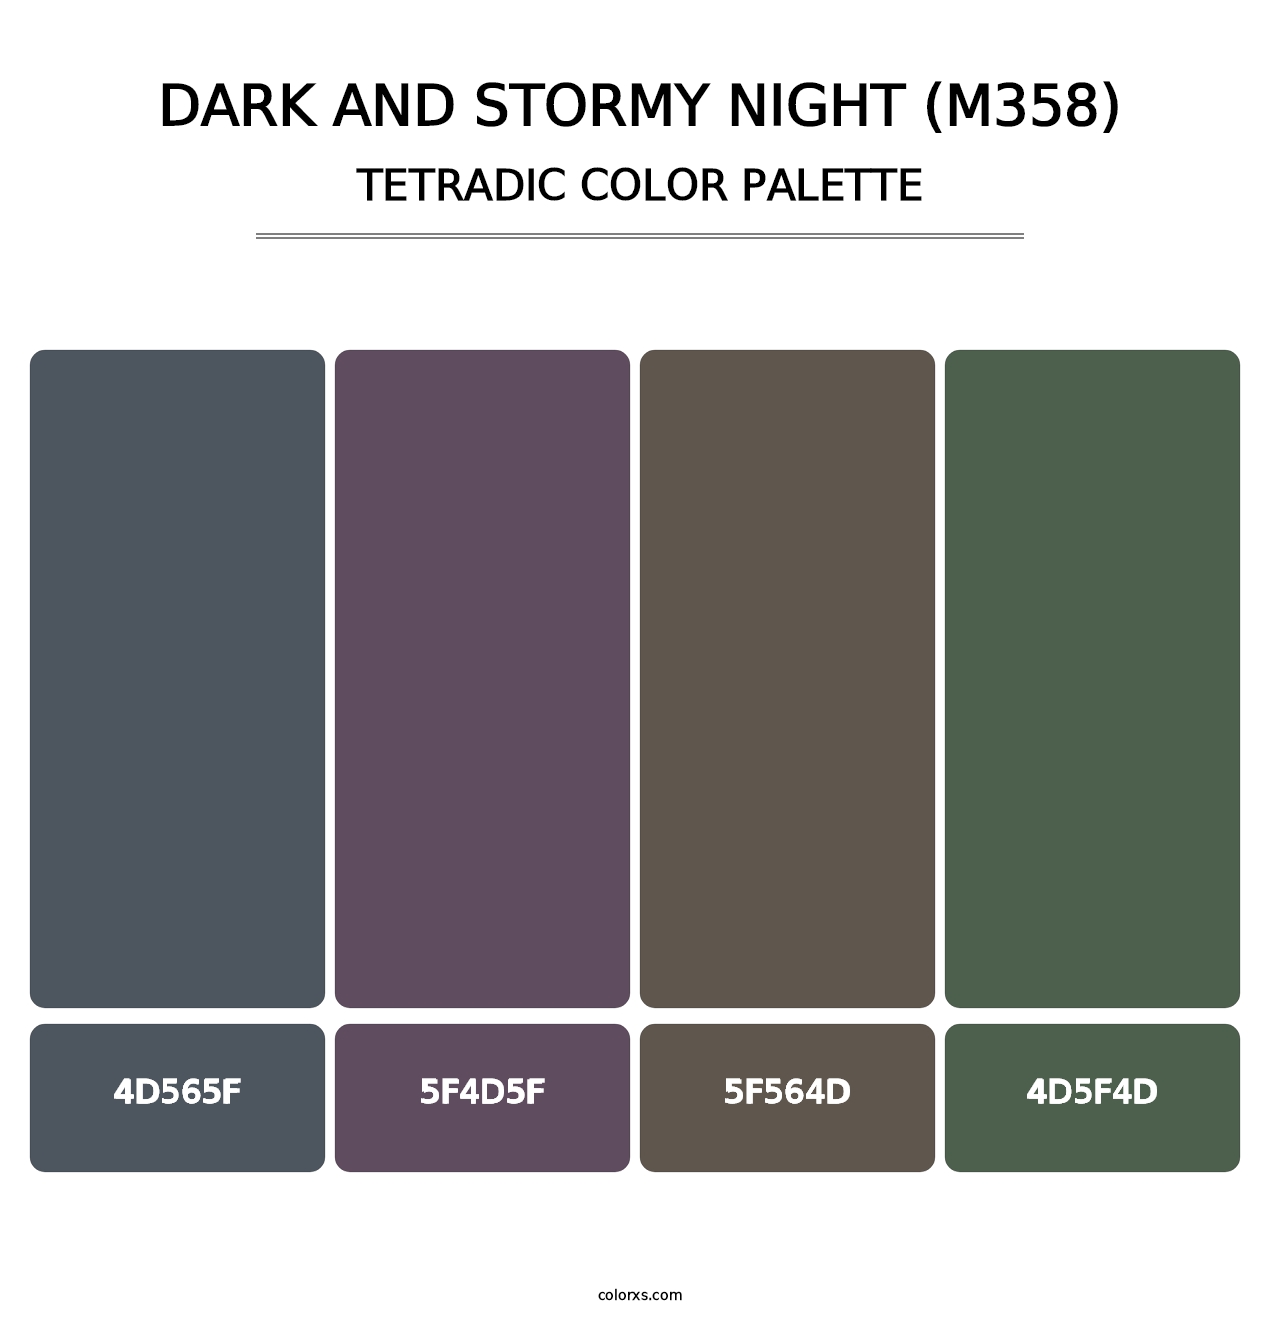 Dark and Stormy Night (M358) - Tetradic Color Palette